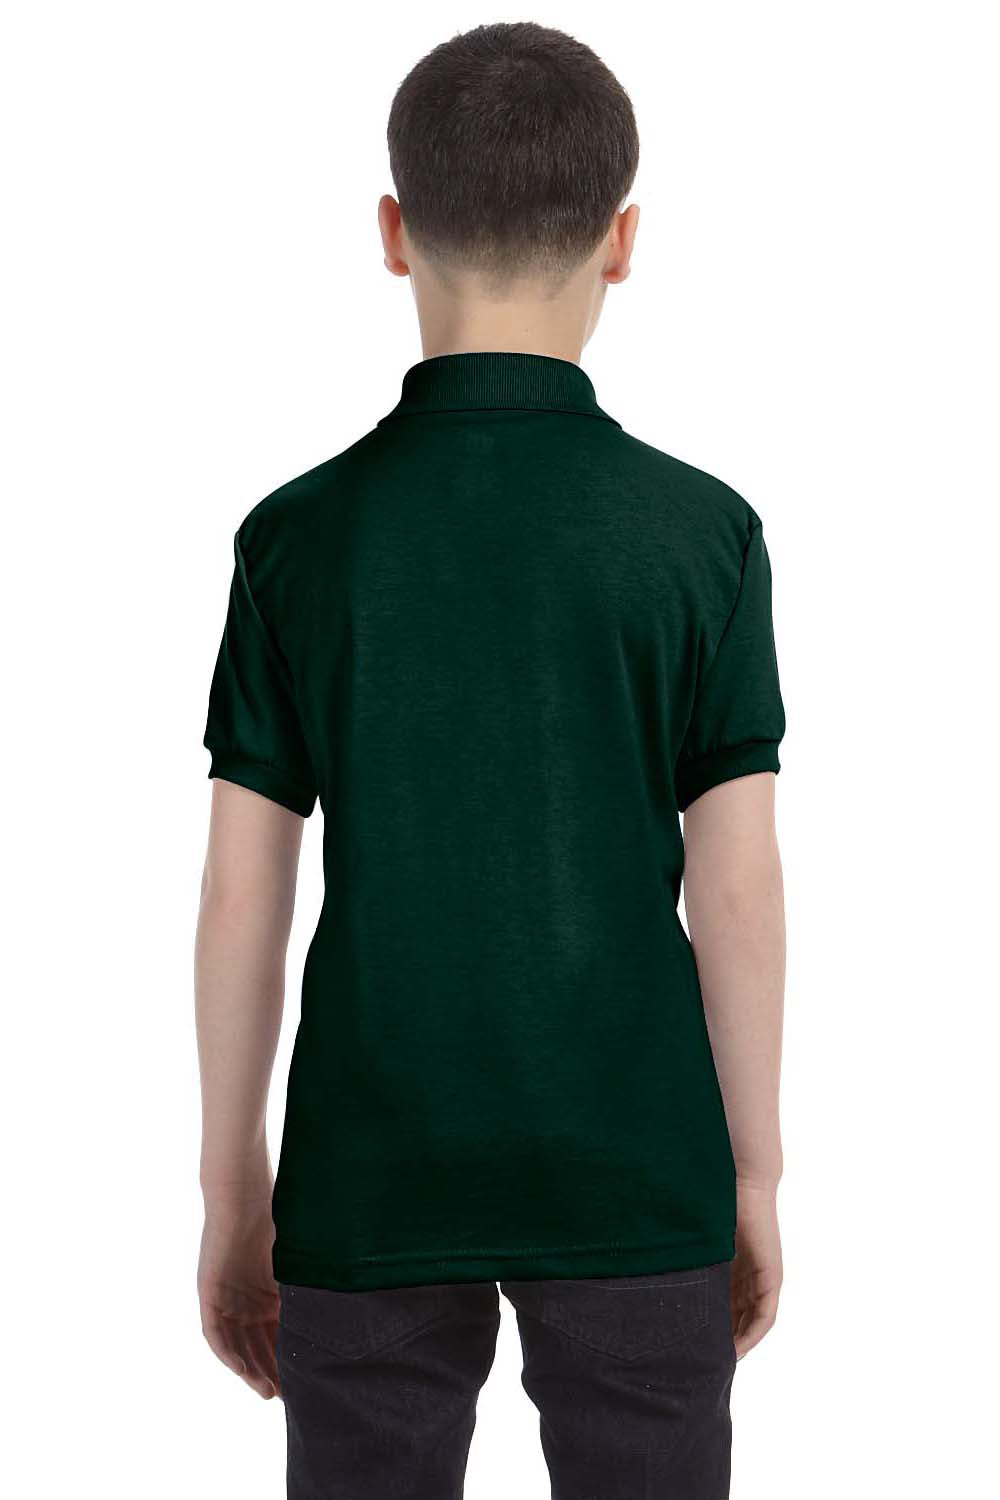 Hanes 054Y Youth EcoSmart Short Sleeve Polo Shirt Forest Green Back